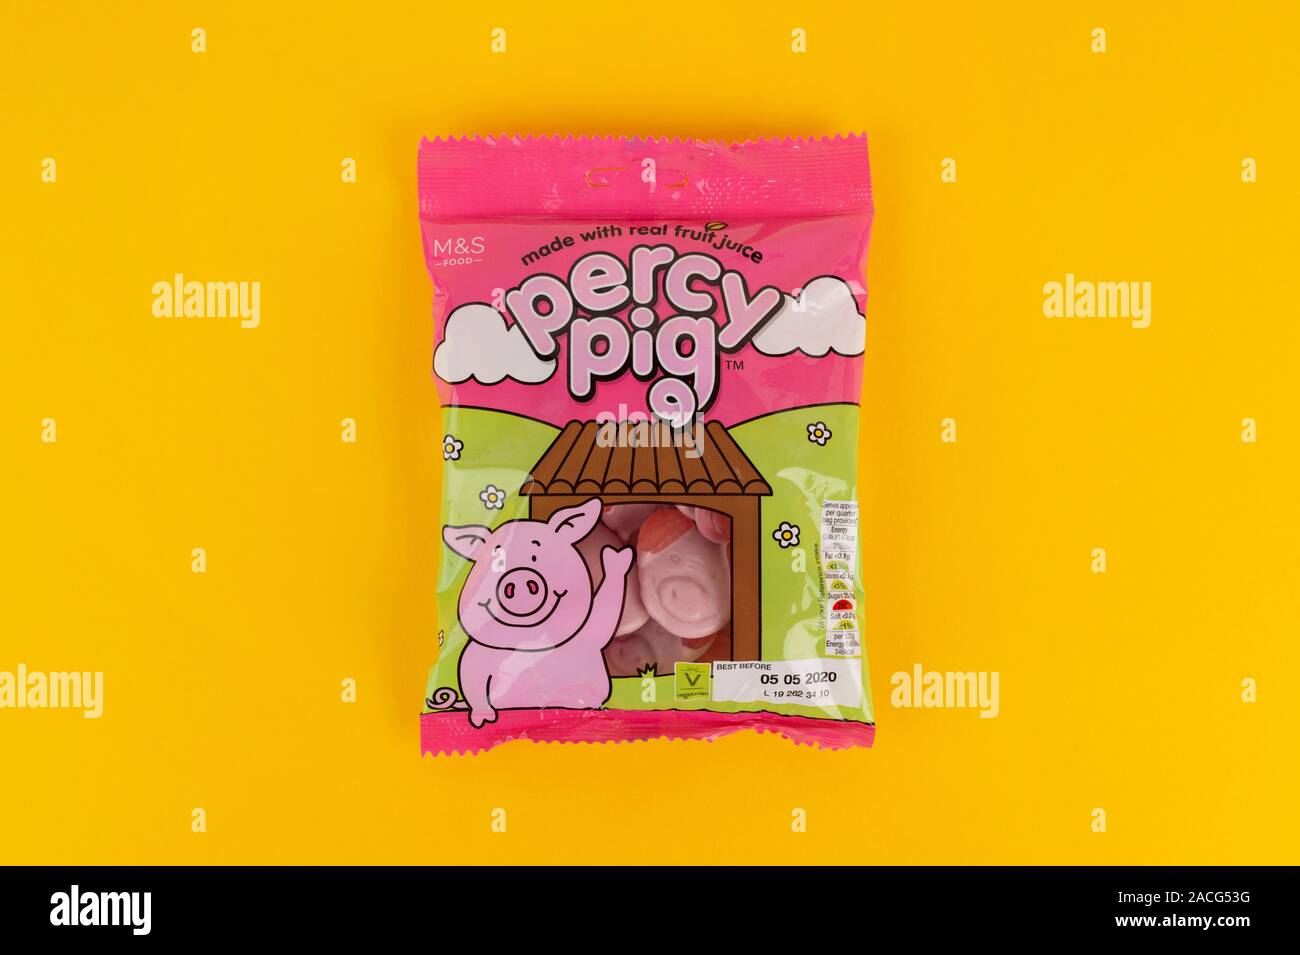 A packet of M&S Percy Pig sweets shot on a yellow background. Stock Photo